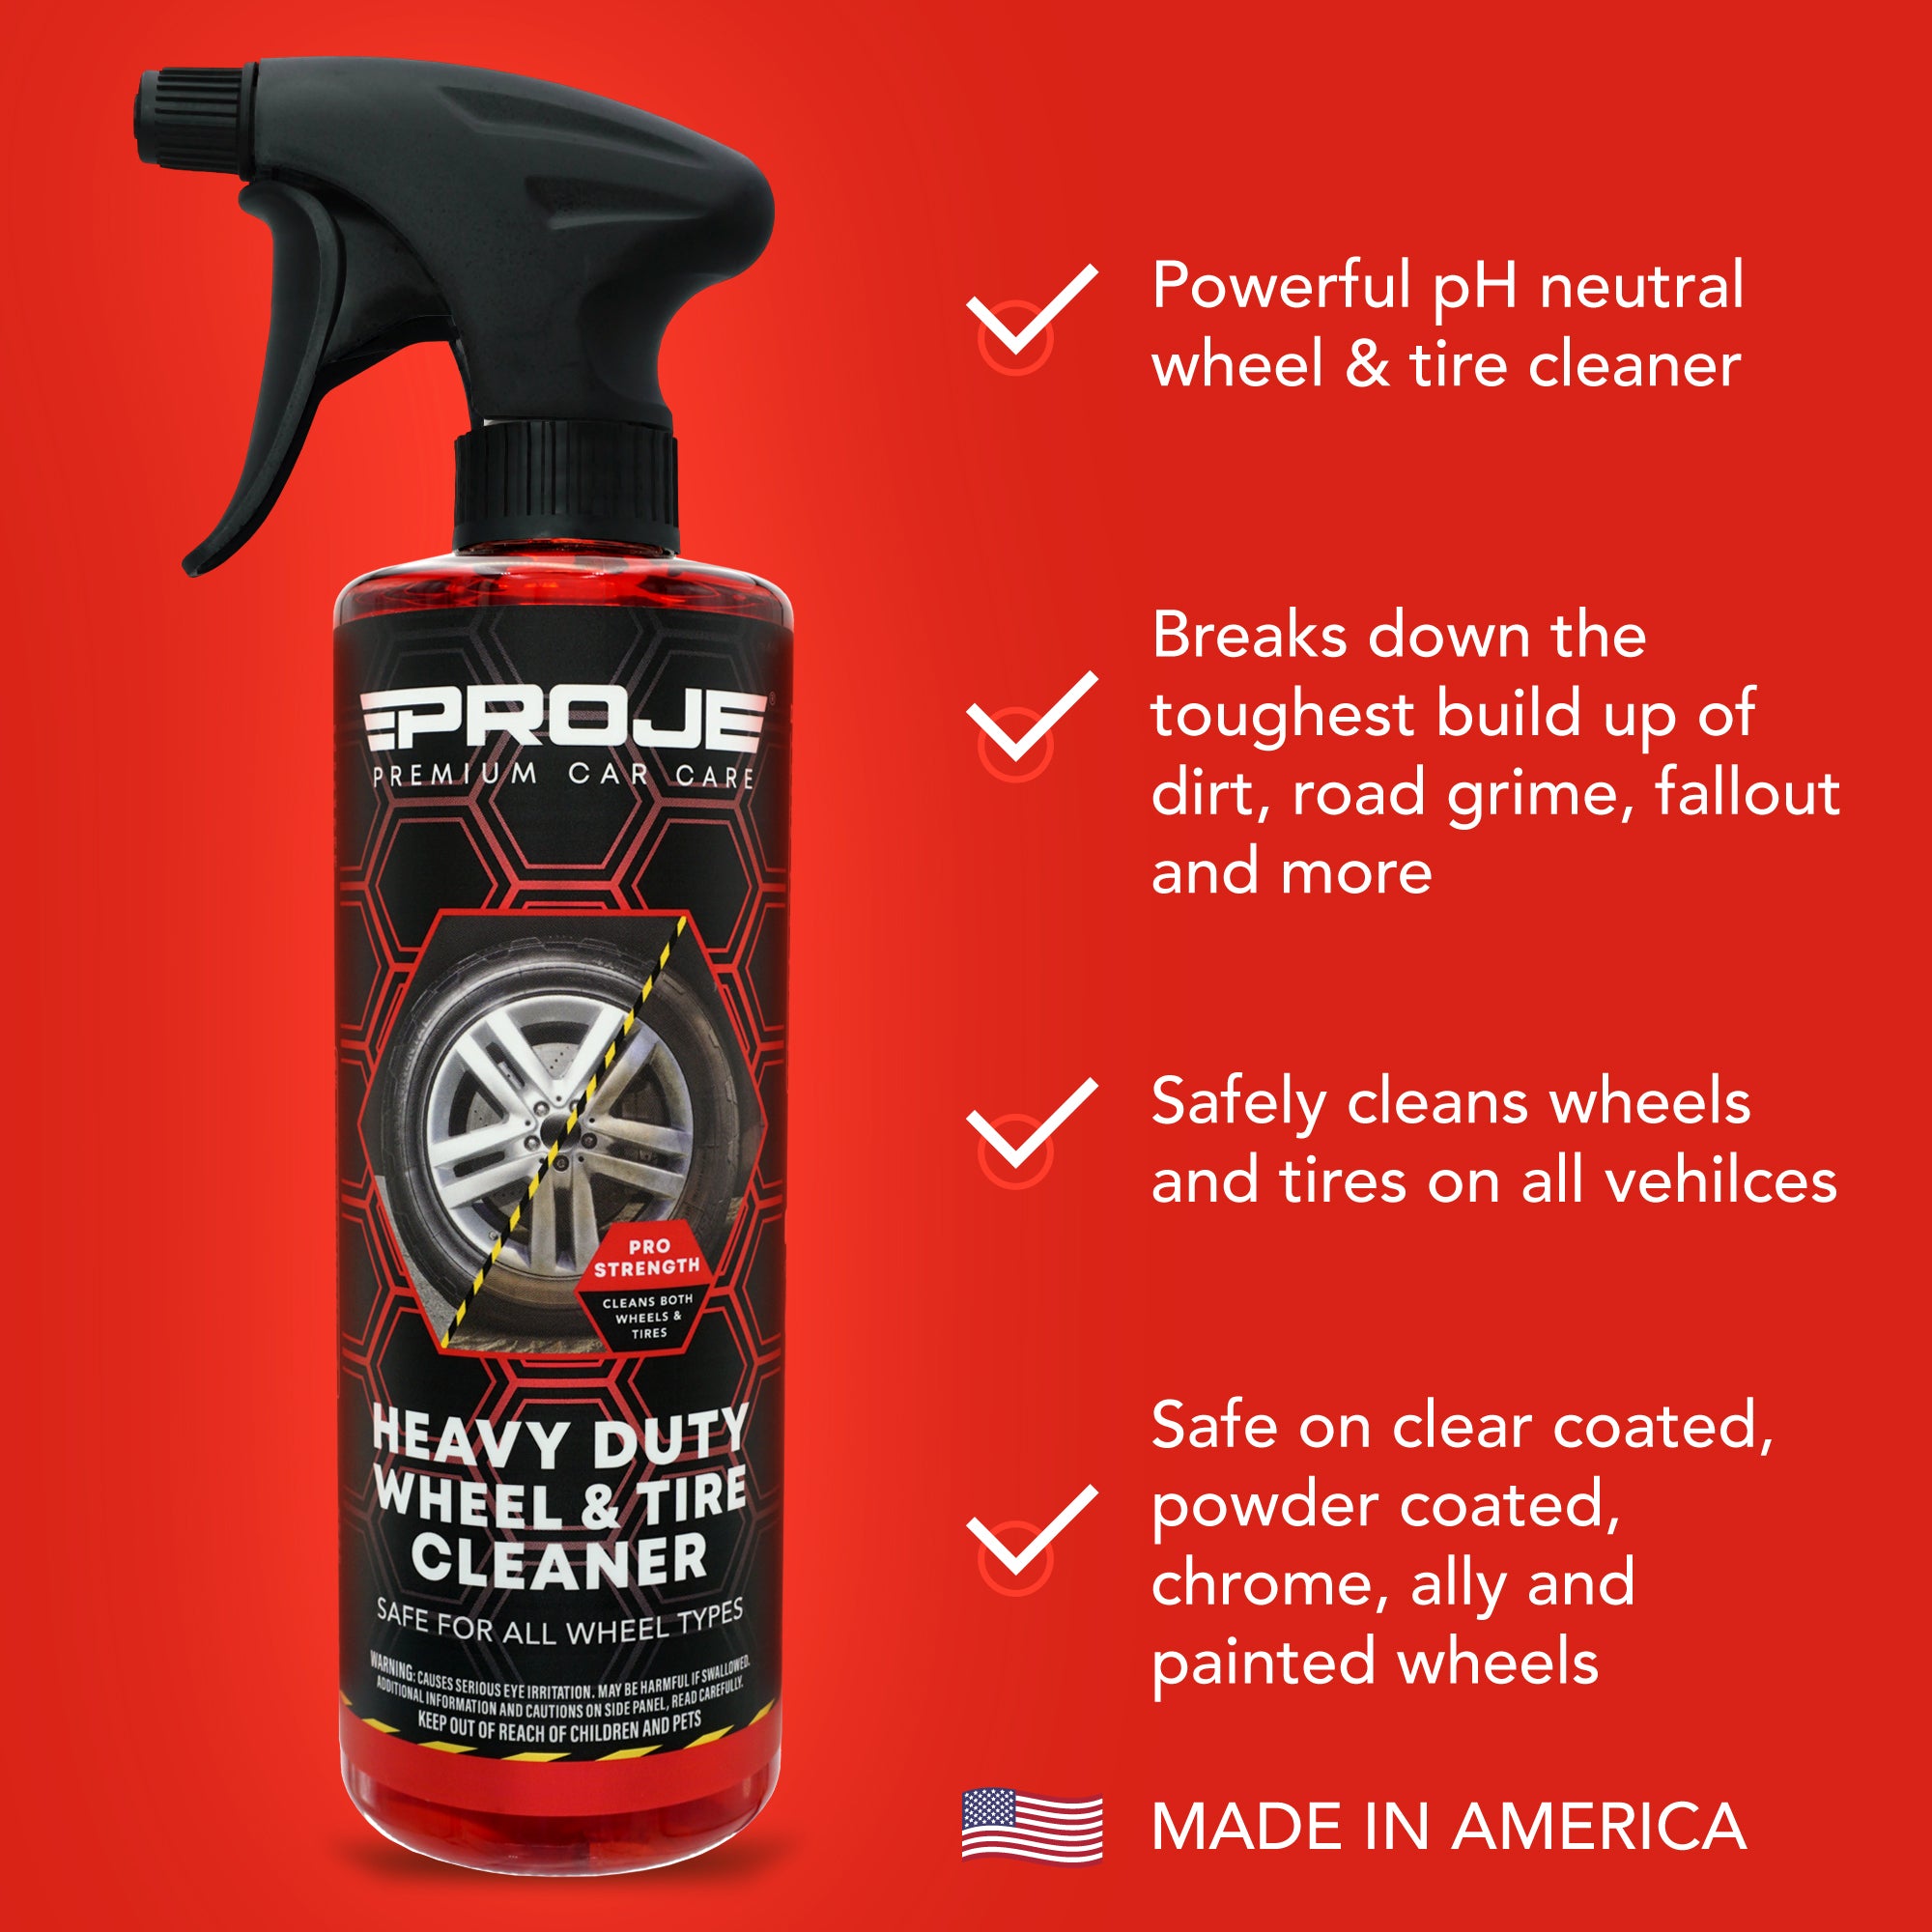 Adams Polishes Wheel & Tire Cleaner Gallon, Professional All in One Tire &  Wheel Cleaner Works,Wheel Brush & Tire Brush, Car Wash Wheel Cleaning Spray  for Car Detailing, Safe On Most Rim